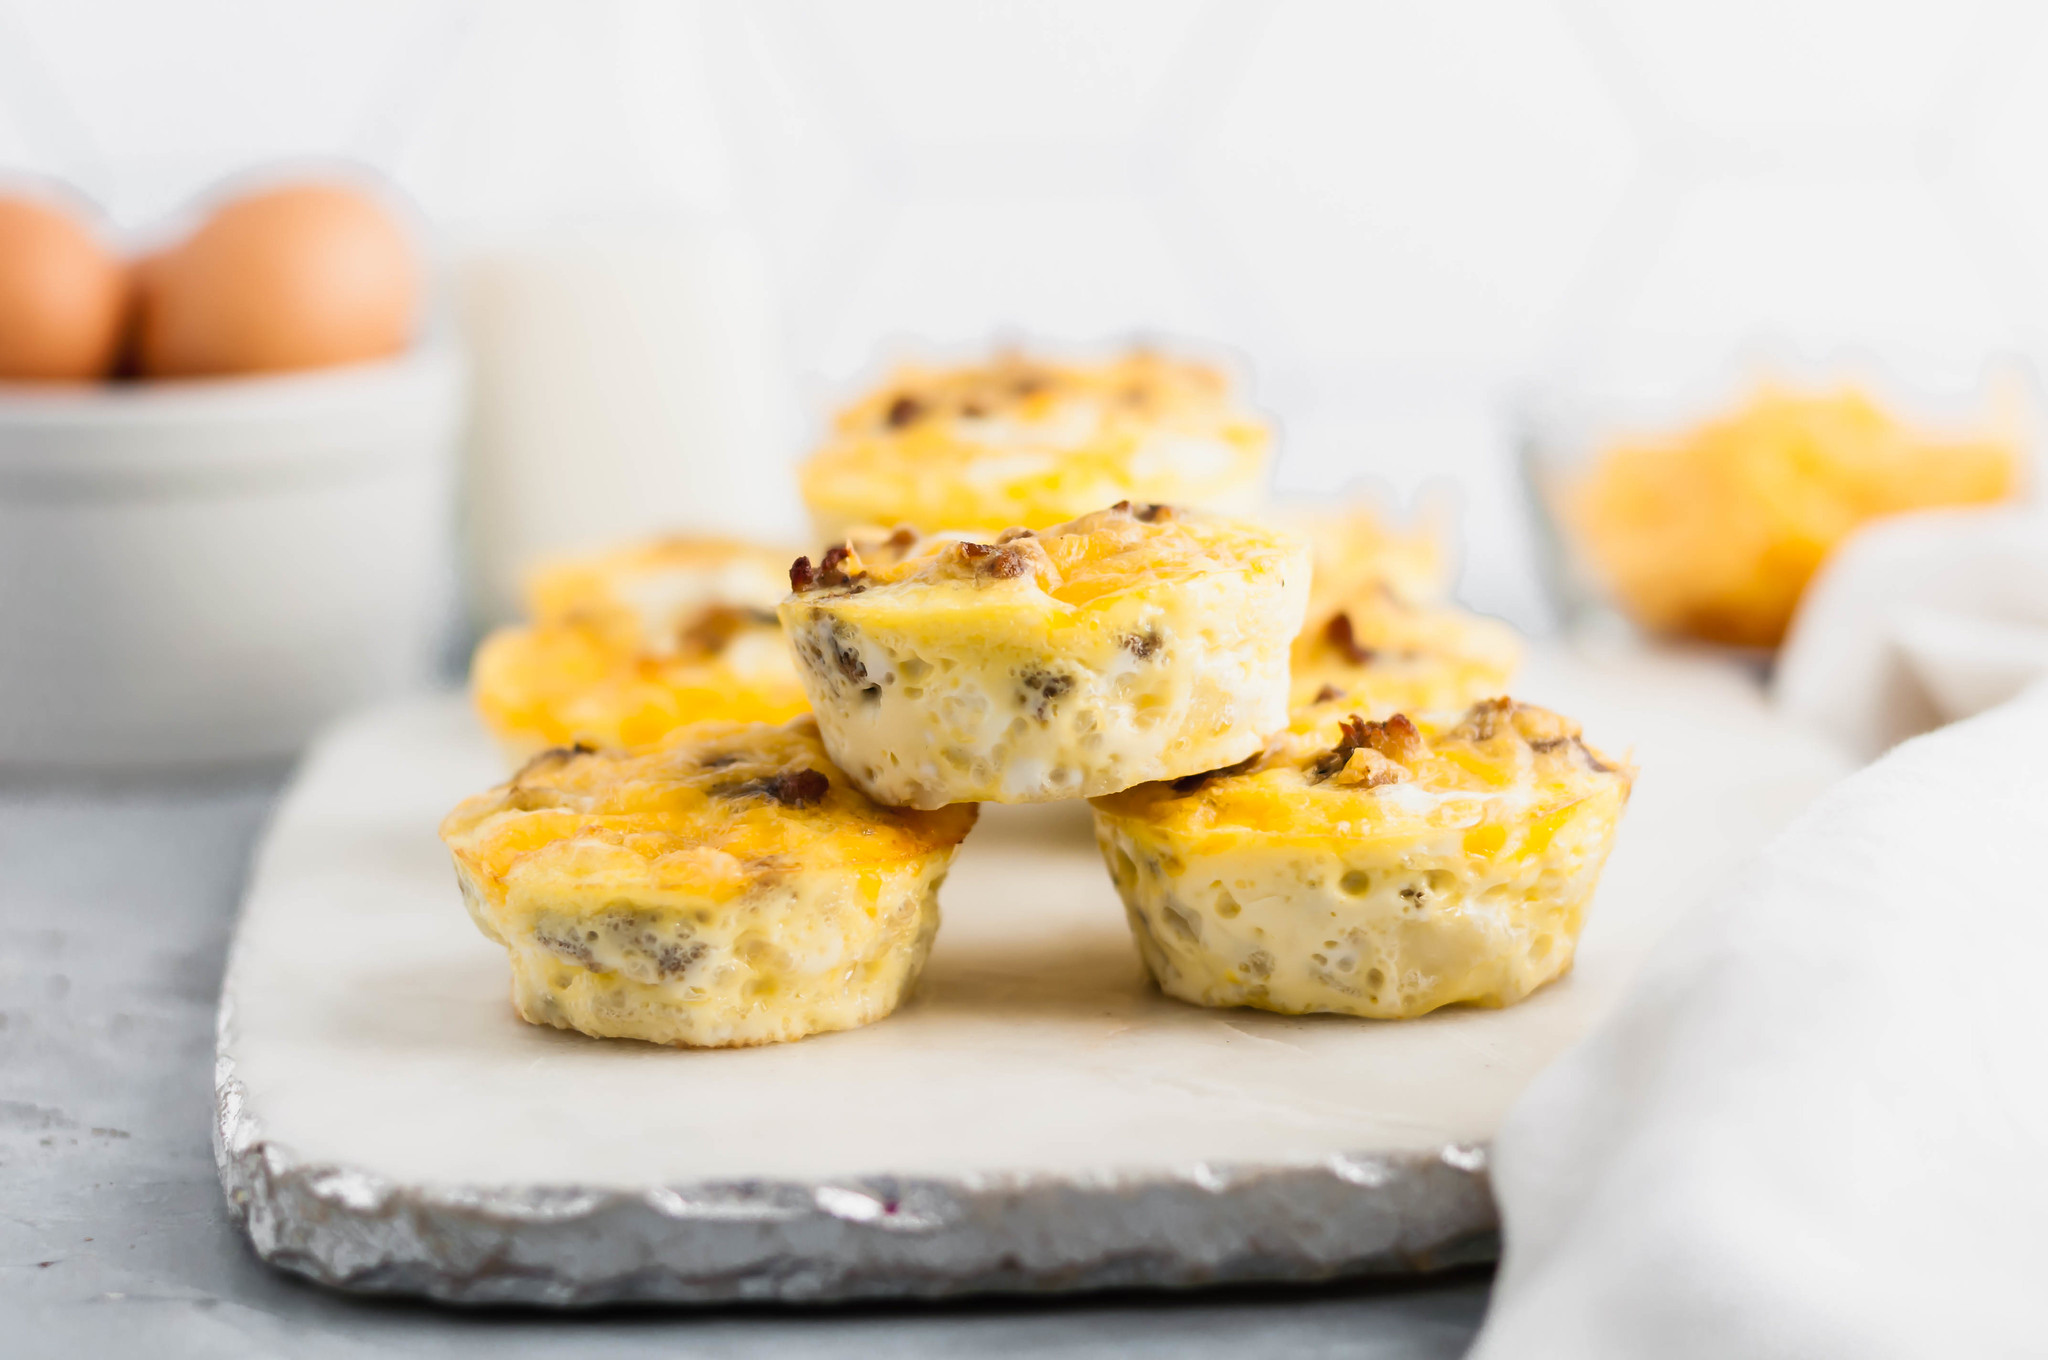 Have breakfast casserole any time with these Individual Breakfast Casserole Bites. Perfect for brunch, holiday breakfast or any day of the week. Make ahead friendly and great for feeding a crowd. Customize these with your favorite breakfast casserole ingredients.